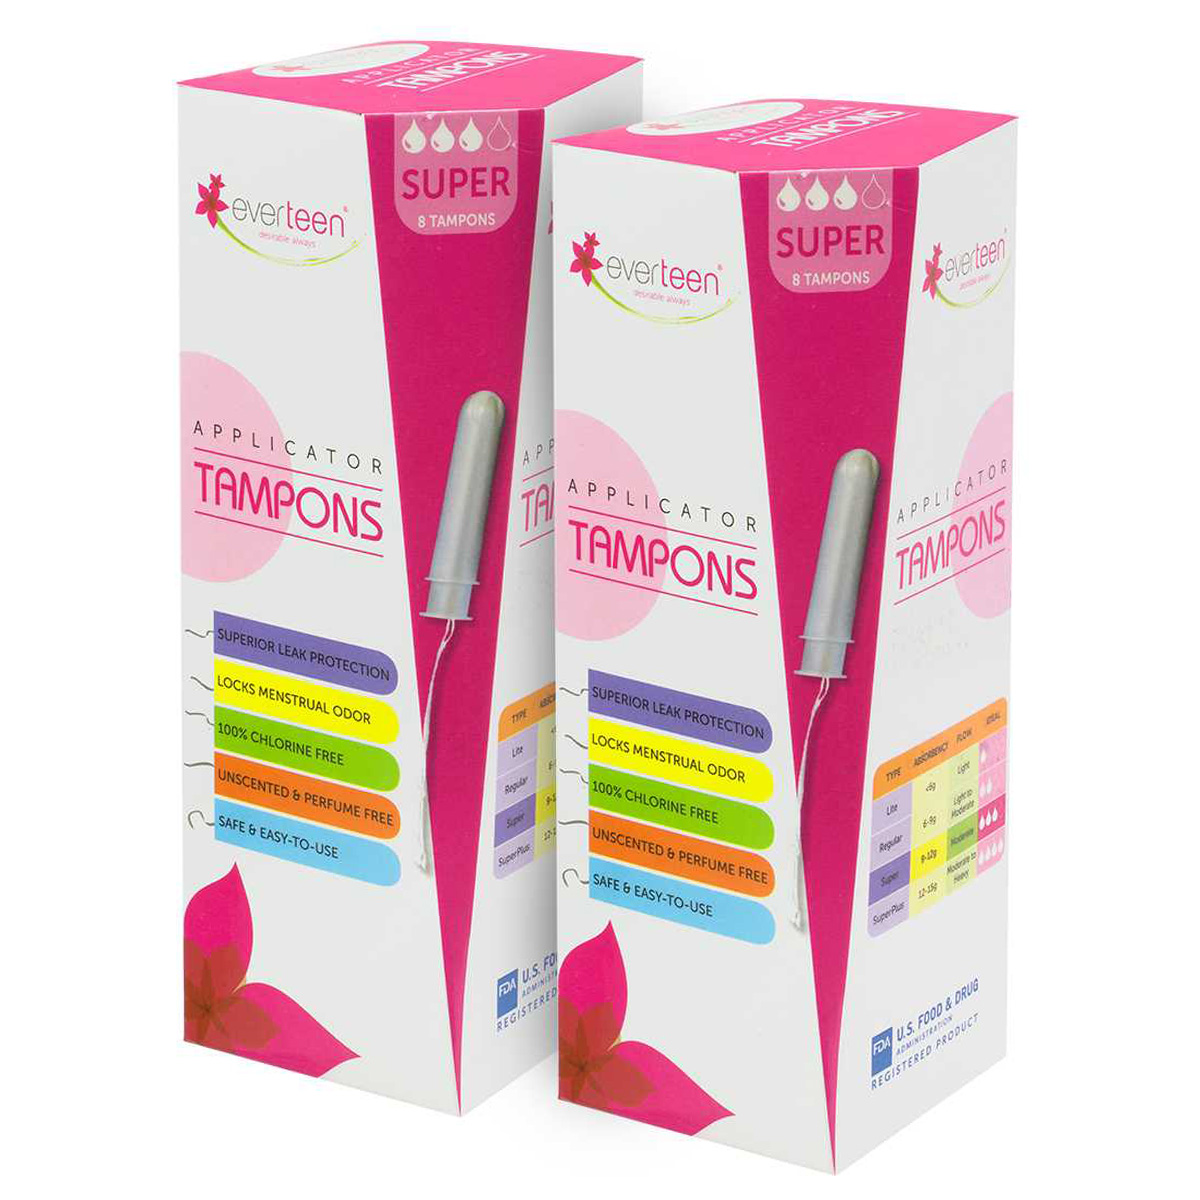 everteen Super Applicator Tampons For Periods In Women - Pack of 2, 8 Tampons Each